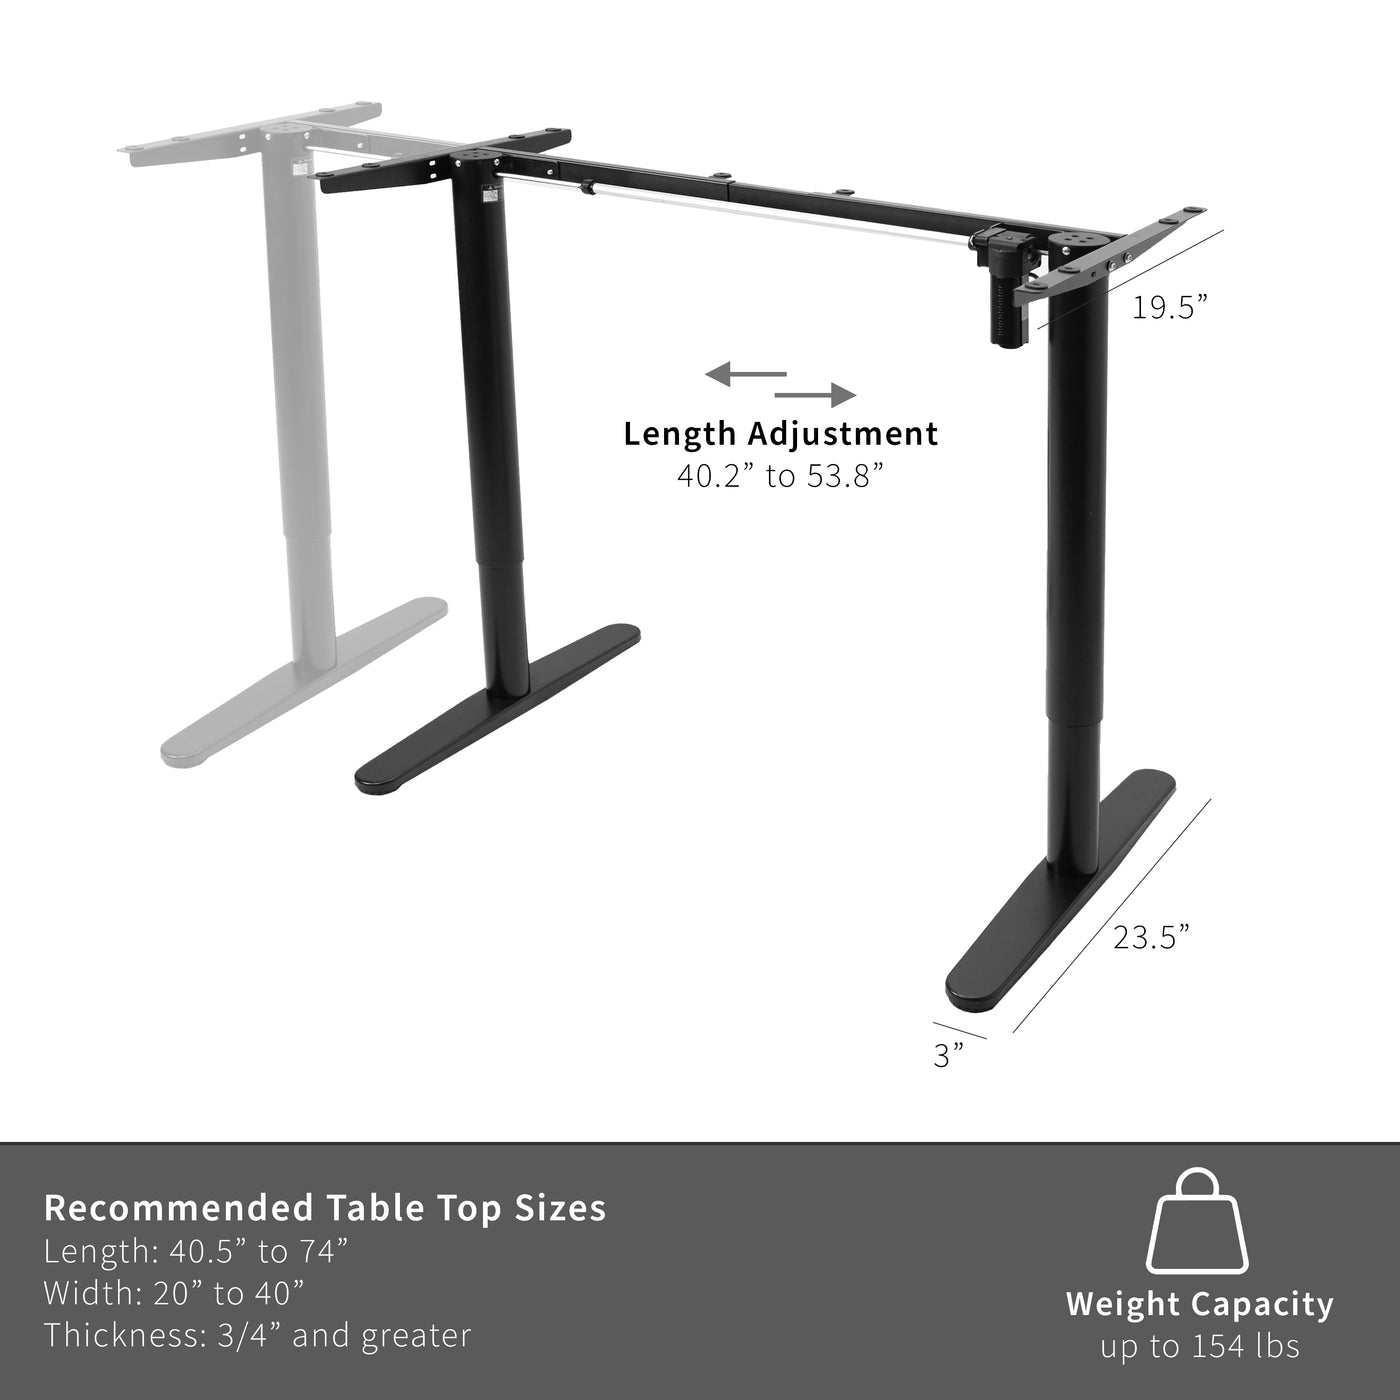 Solid all-steel construction with length adjustment to fit most modern desktops.